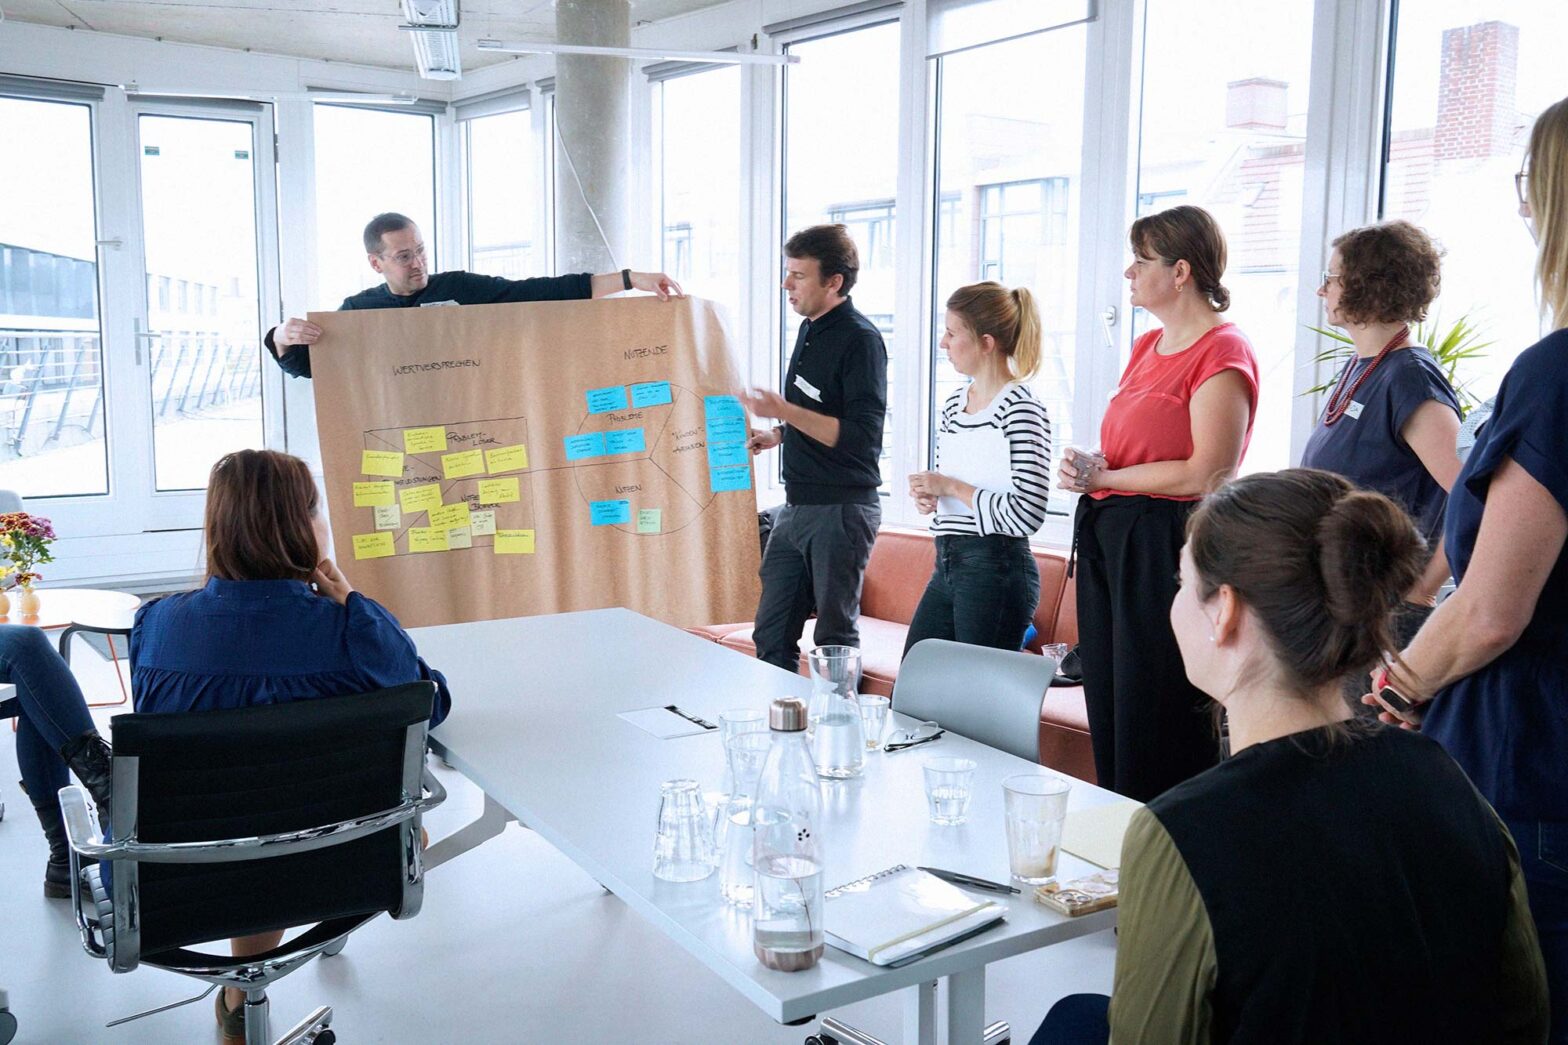 Almost a dozen people in a well-lit modern workshop space – with 2 men in the centre holding a large sheet everyone is looking at – it contains various yellow and blue sticky notes with the headings ‘value proposition’ and ‘users’